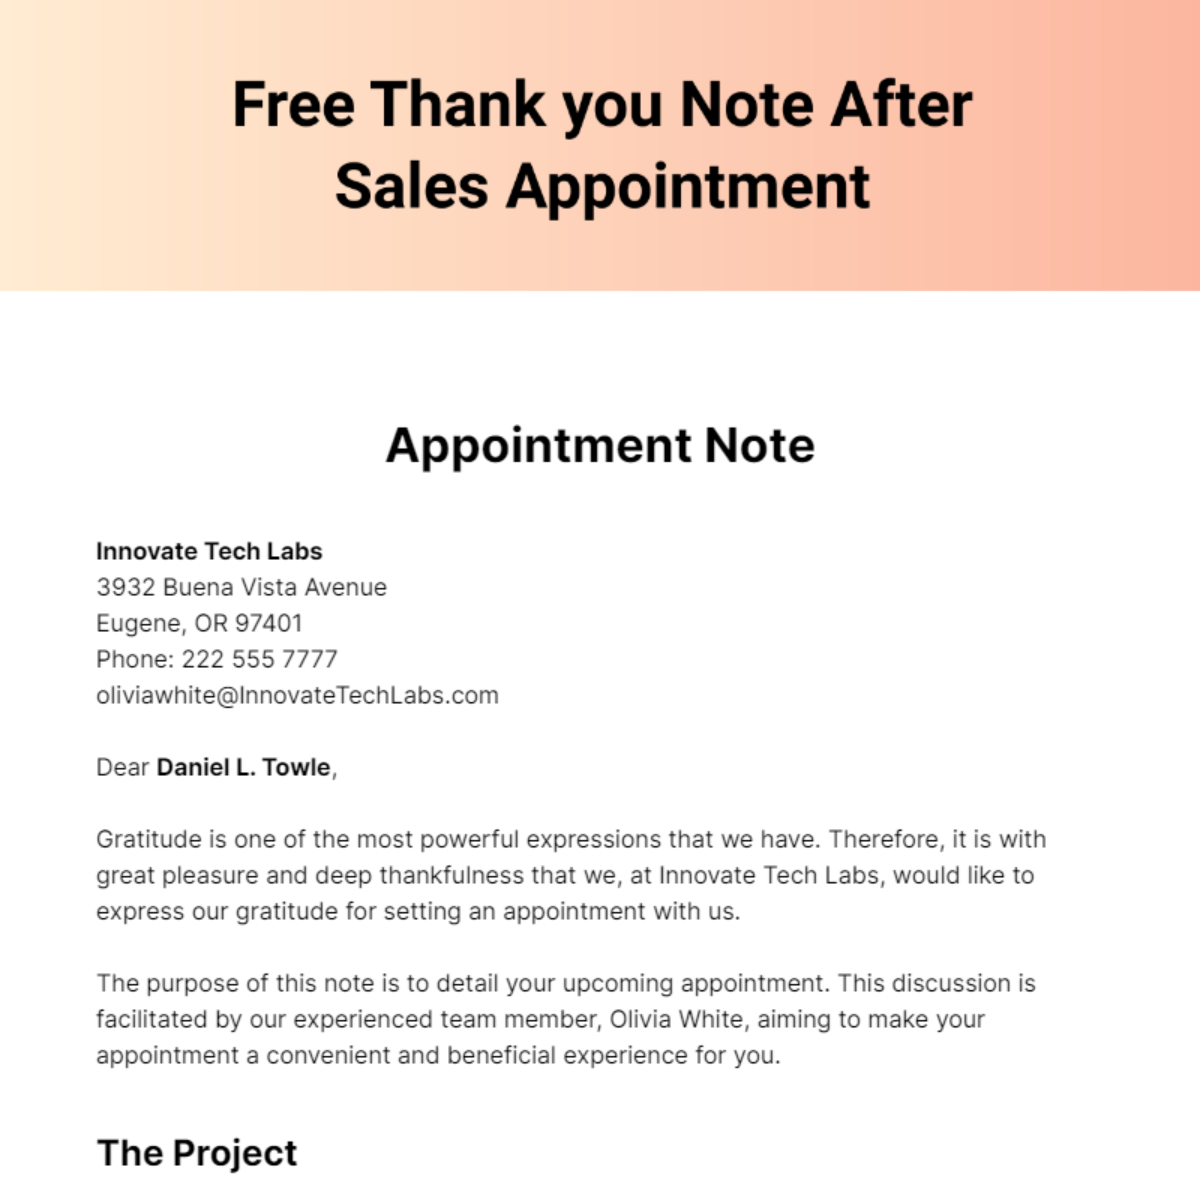 Free Thank you Note After Sales Appointment Template